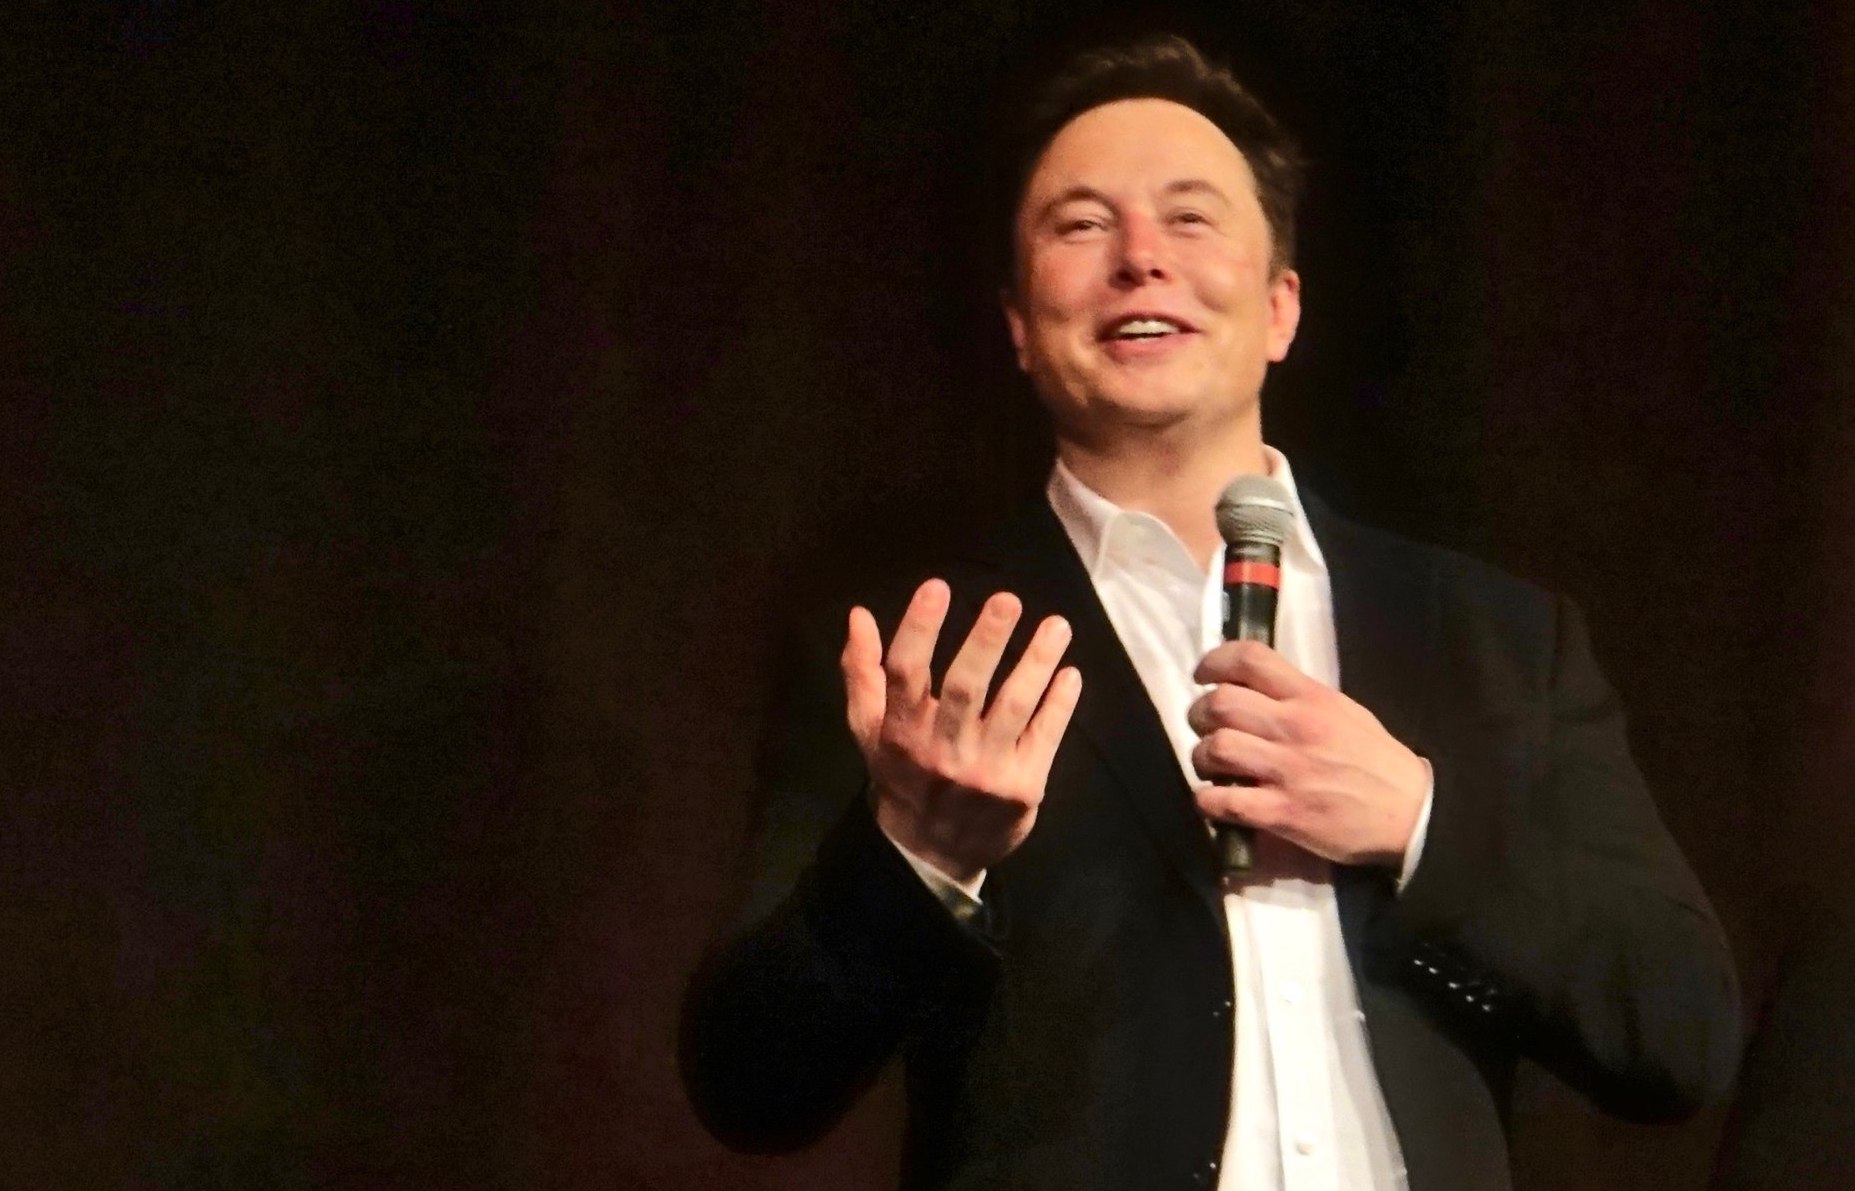 Here is what Elon Musk and Tucker Carlson will talk about during their interview